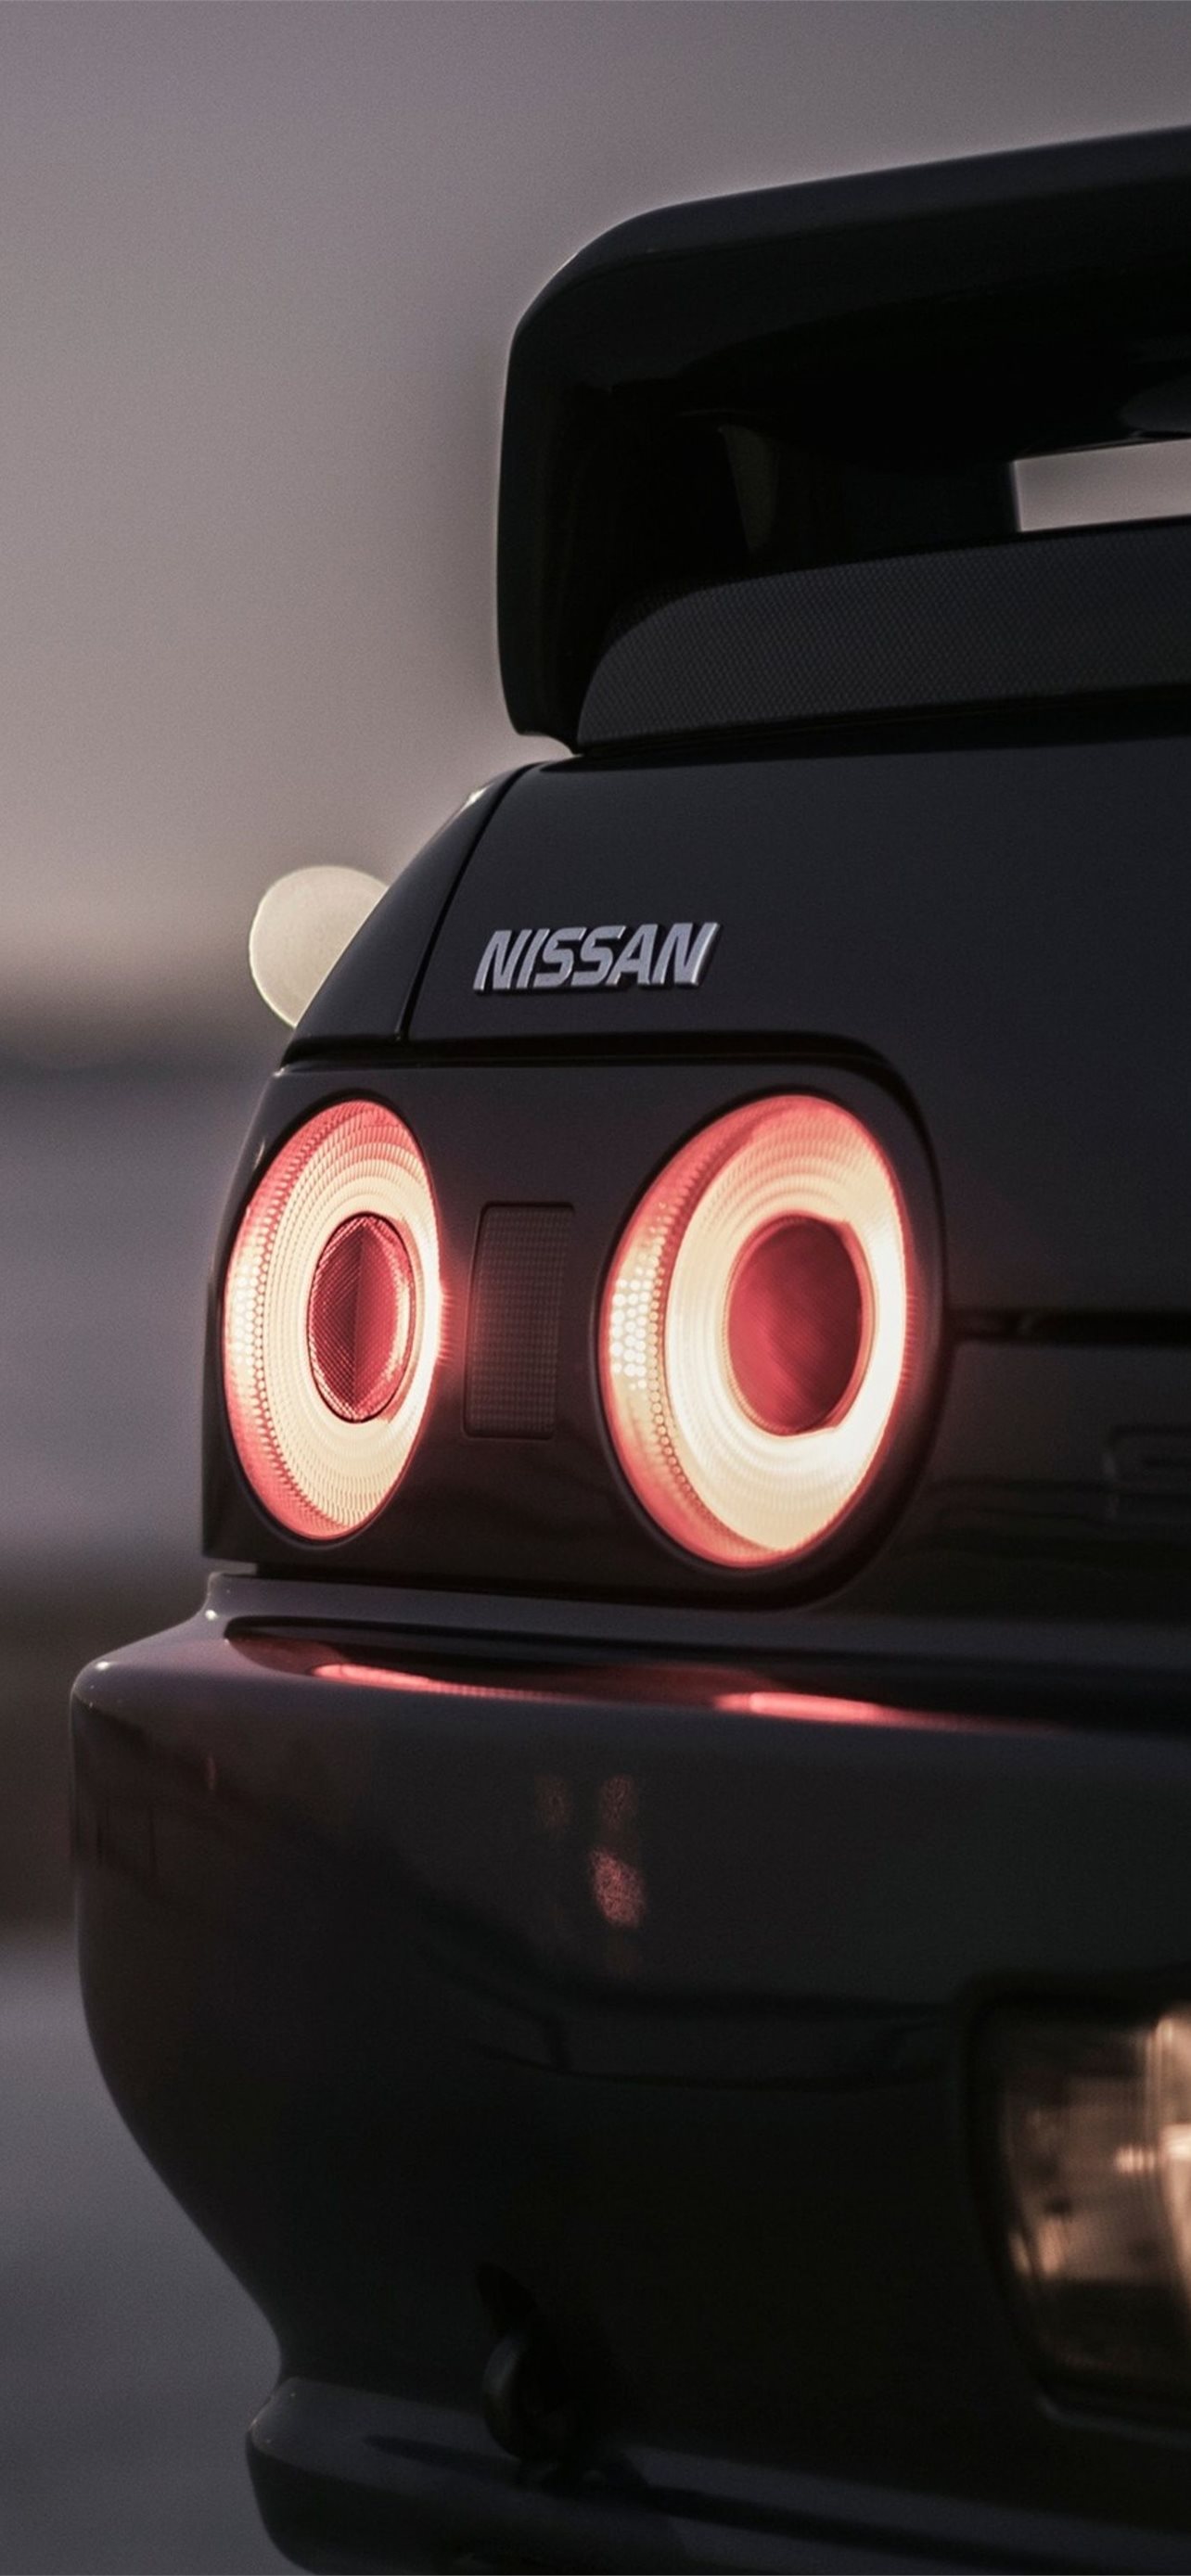 Nissan R32 Iphone Wallpapers Free Download